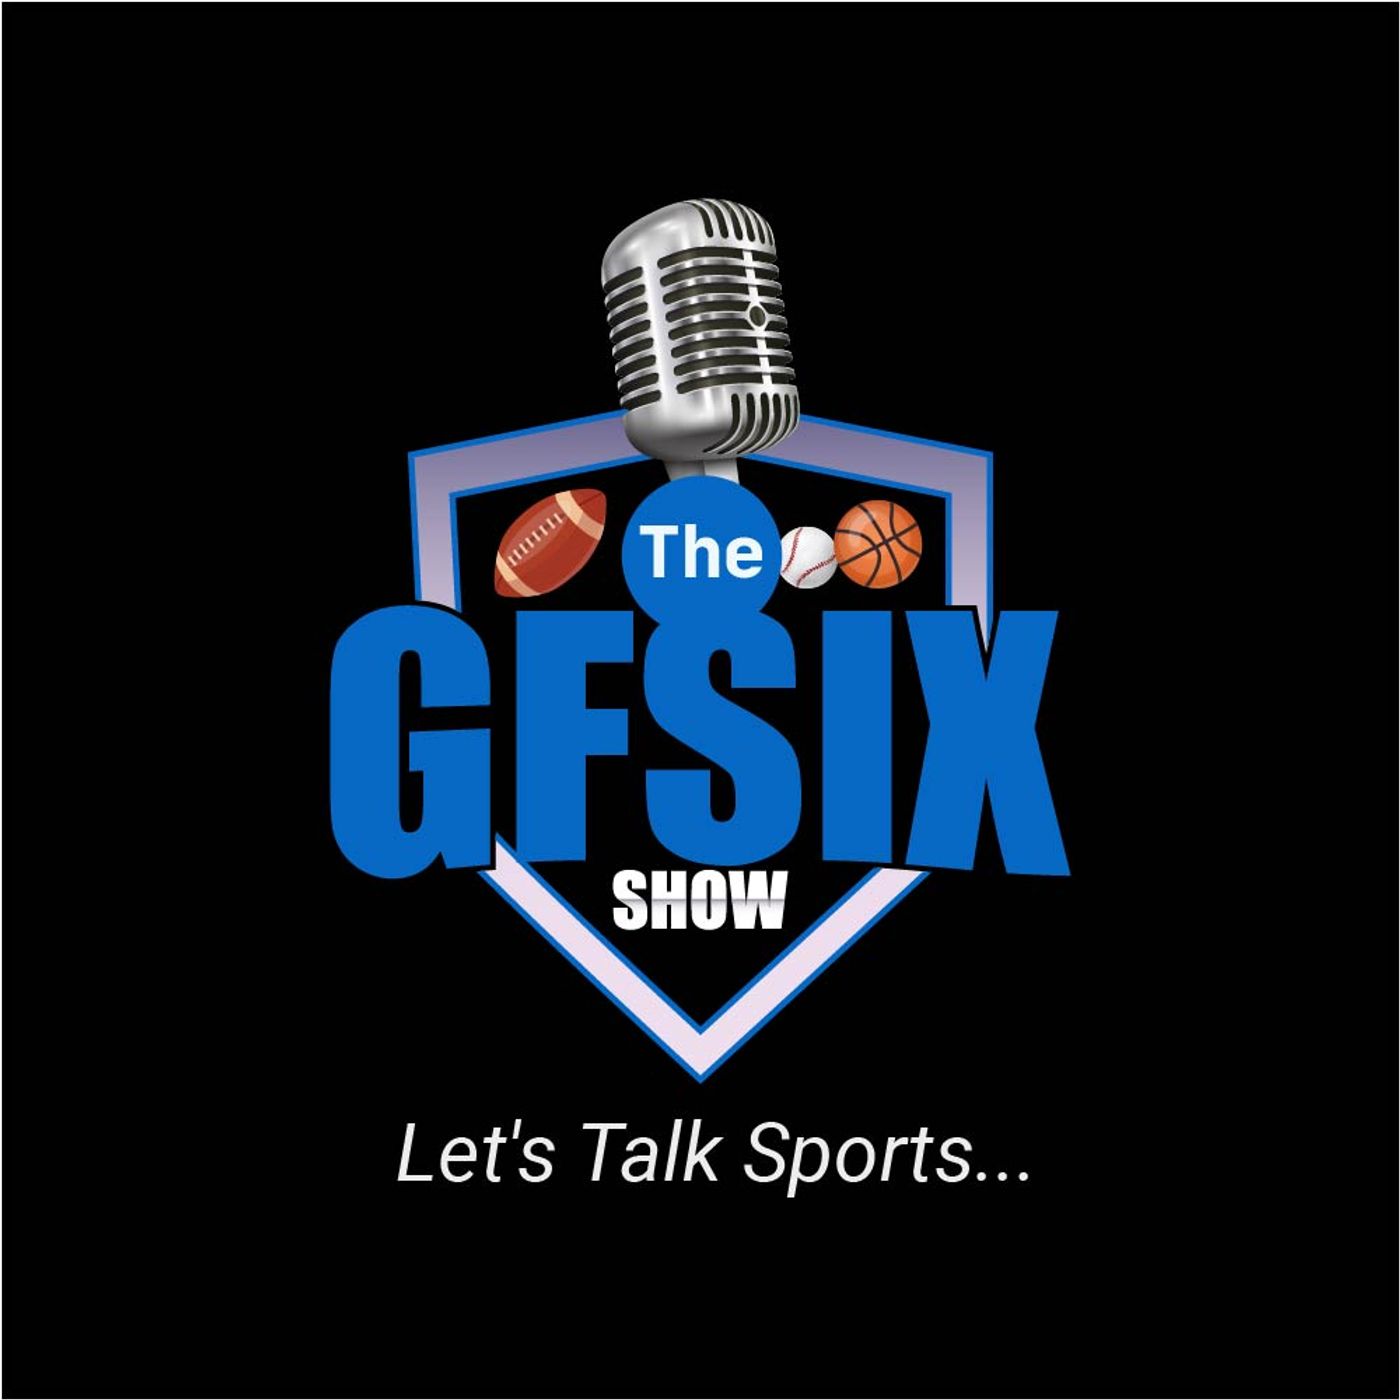 The GFsix Show "WE LOVE OUR SPORTS"